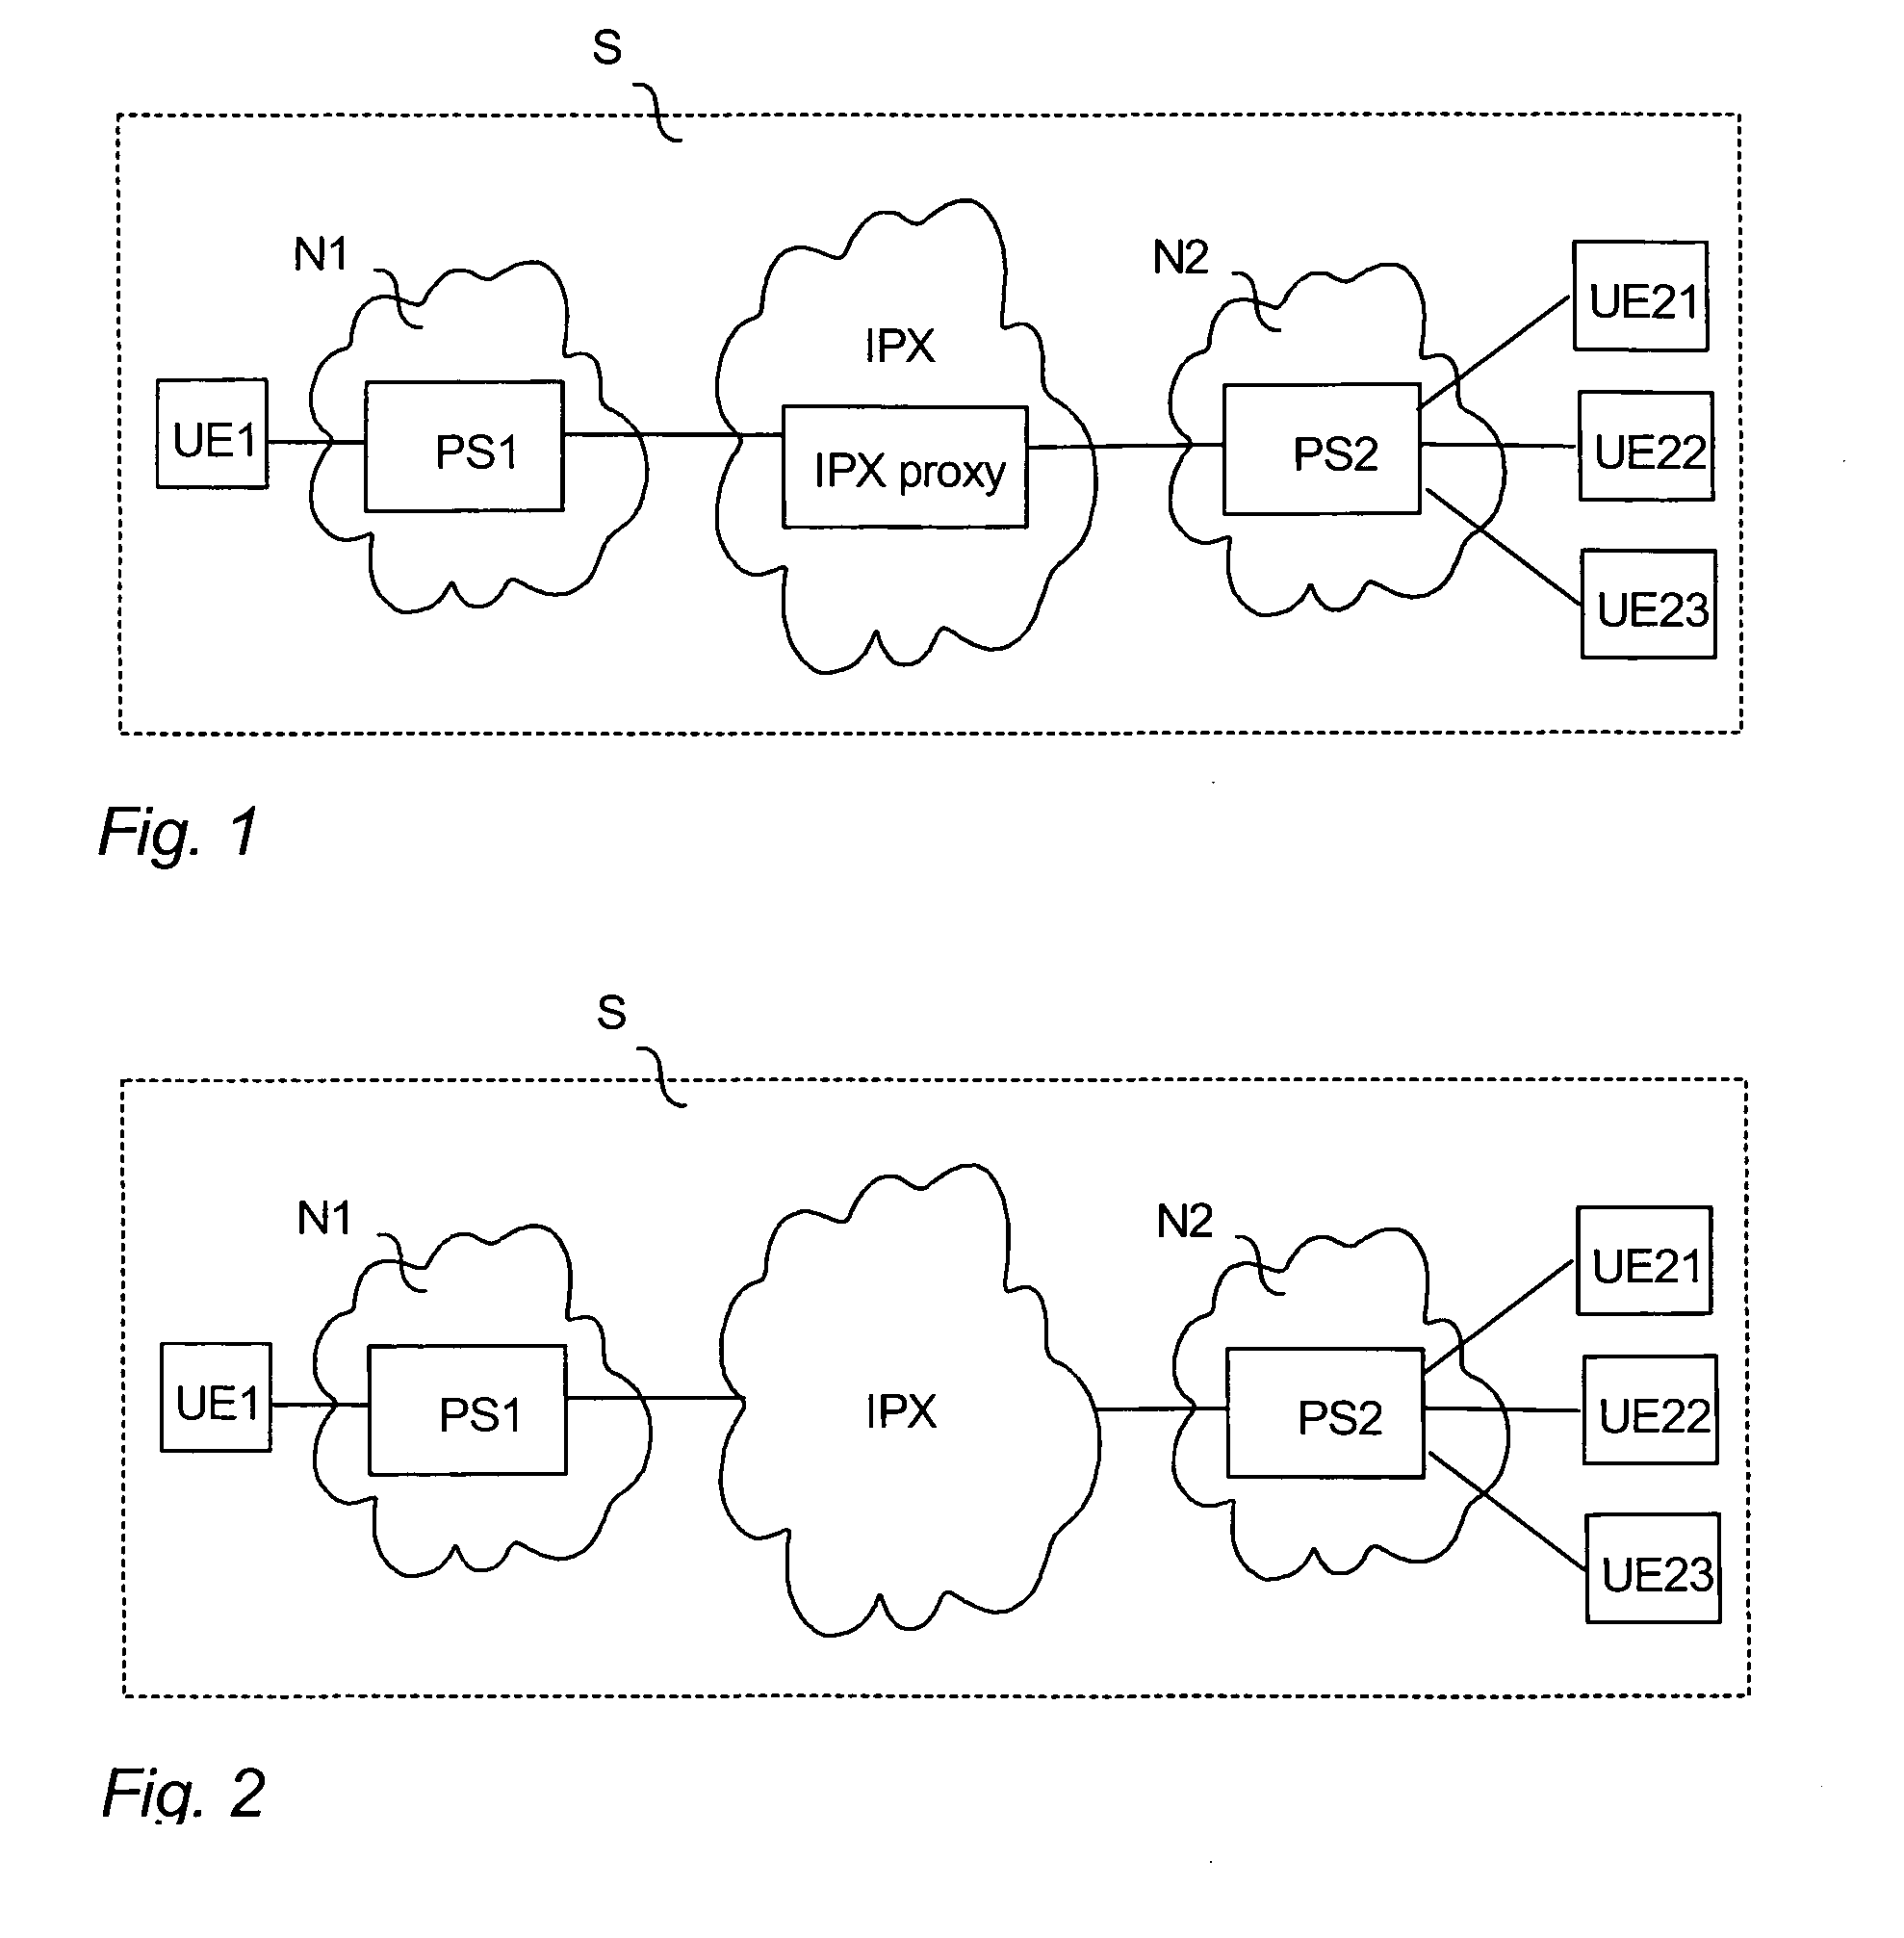 Managing presence information in a communications system